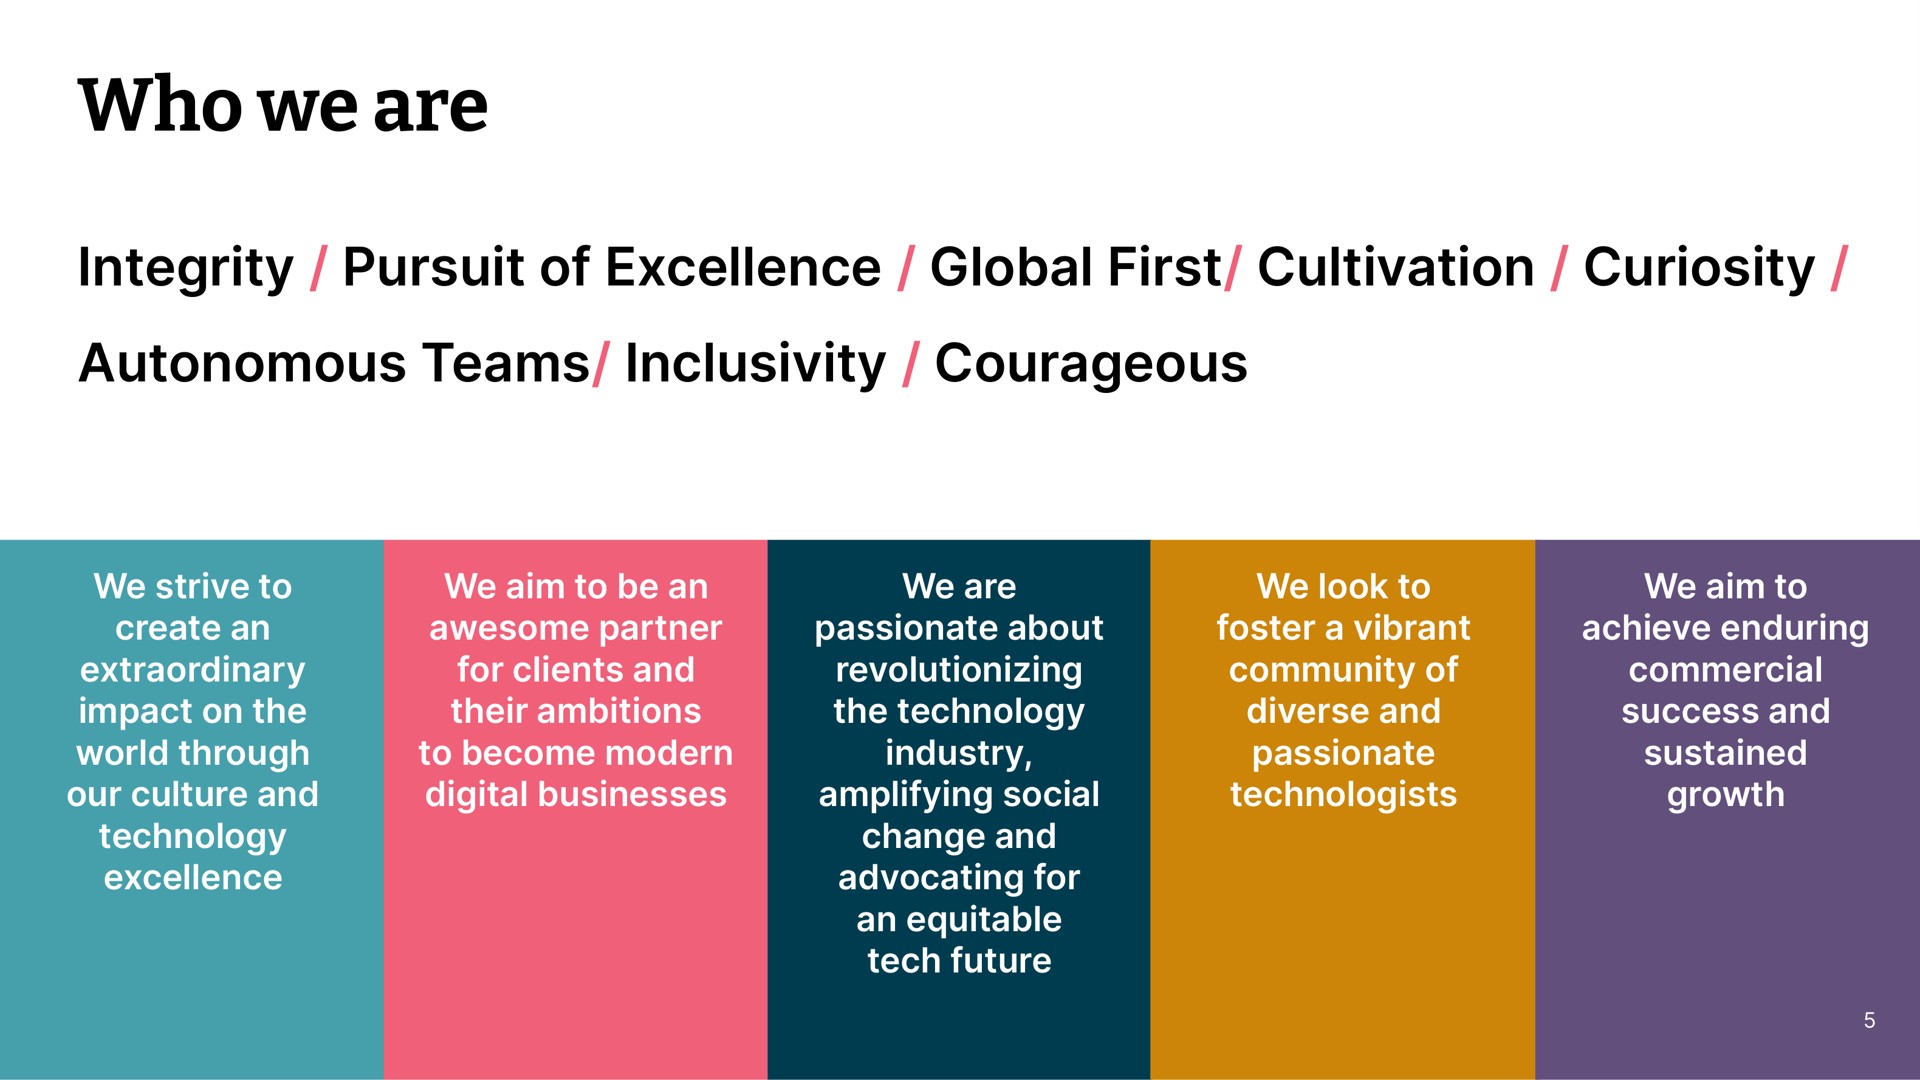 who we are integrity pursuit of excellence global first cultivation curiosity autonomous teams courageous | Thoughtworks